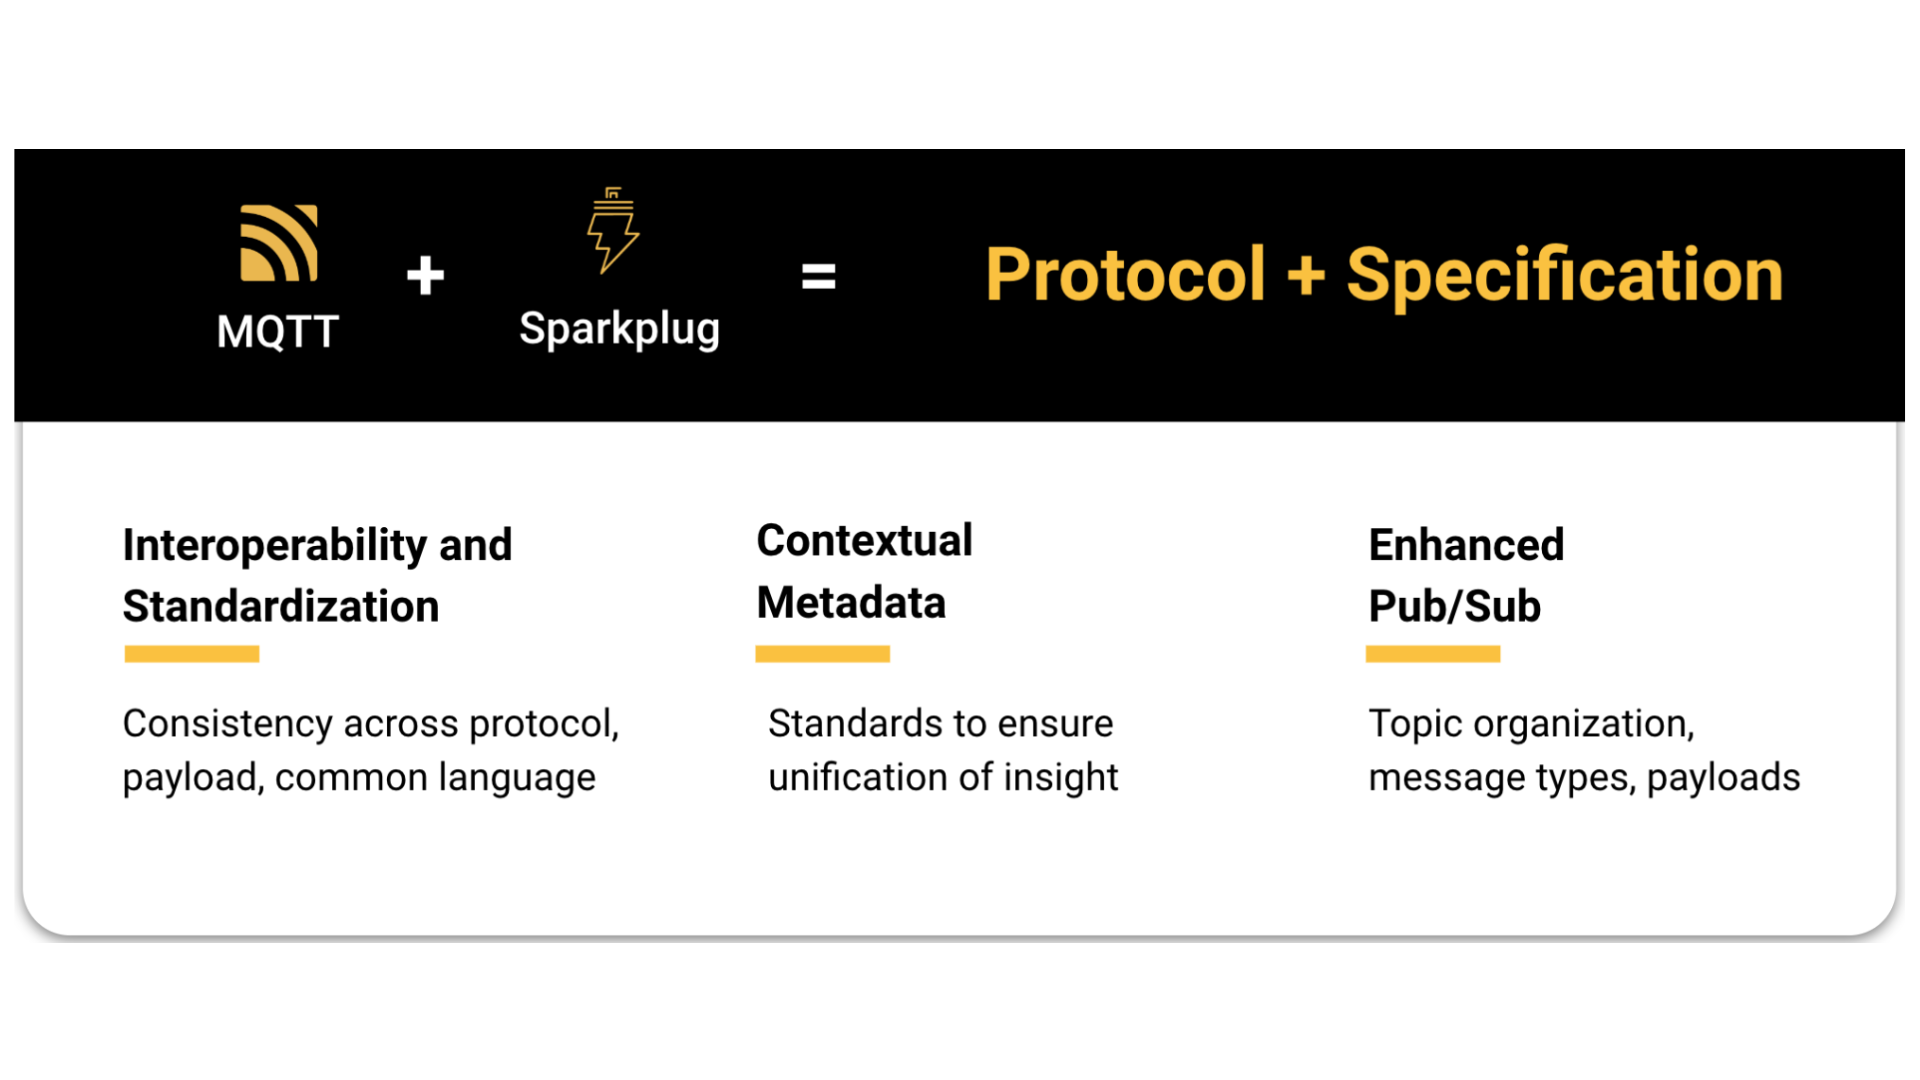 Sparkplug adds context to MQTT data for Industrial IoT.